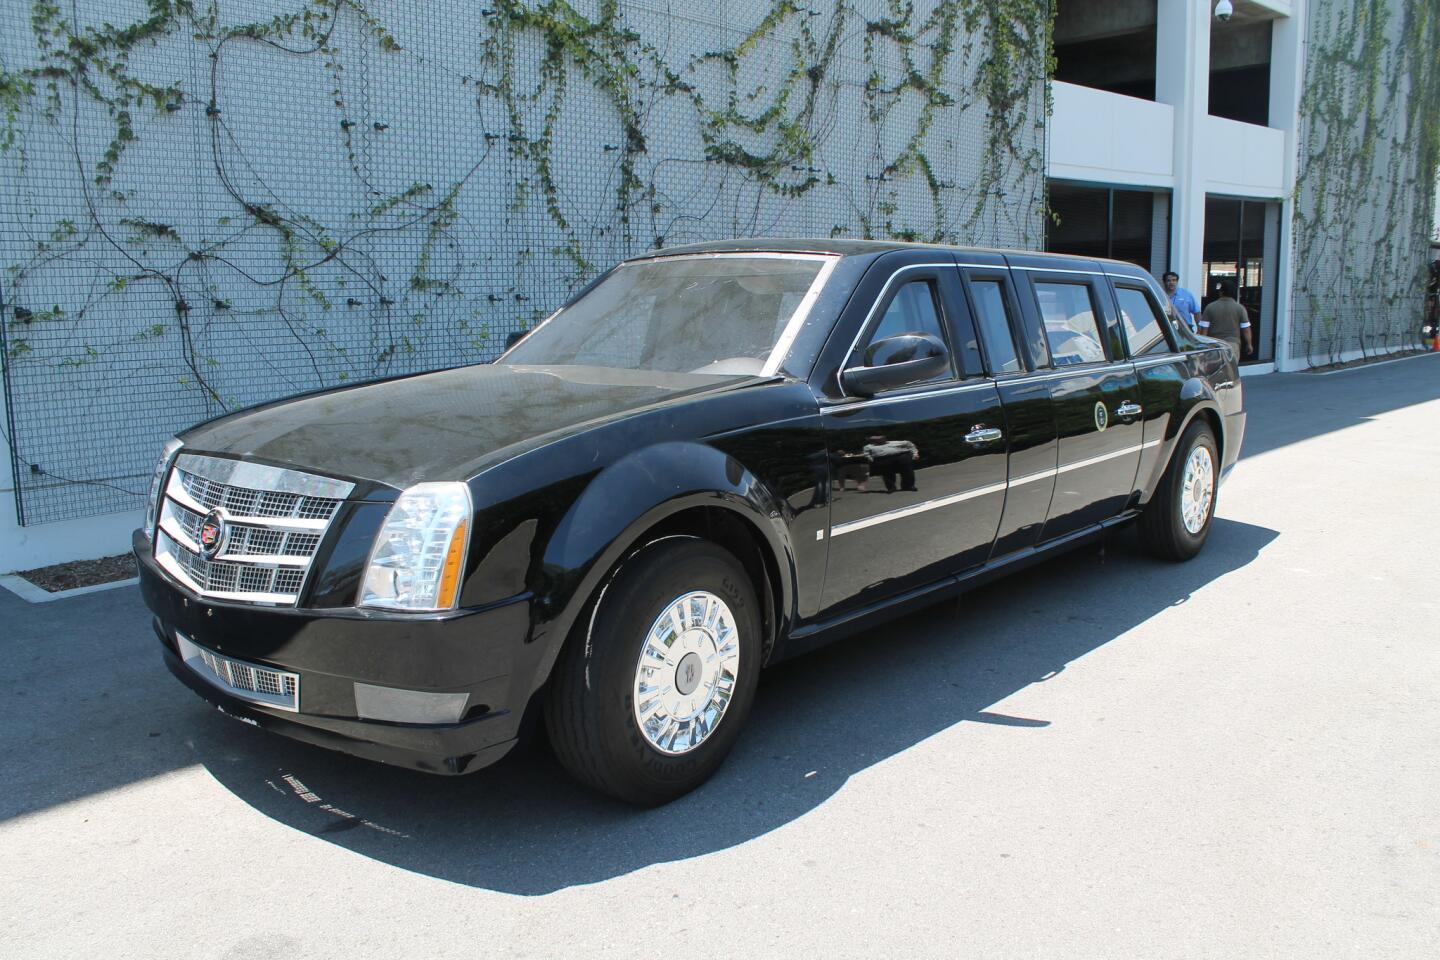 This full-scale replica of the armored limousine President Obama uses was featured prominently in the film 'White House Down,' starring Channing Tatum and Jamie Foxx.